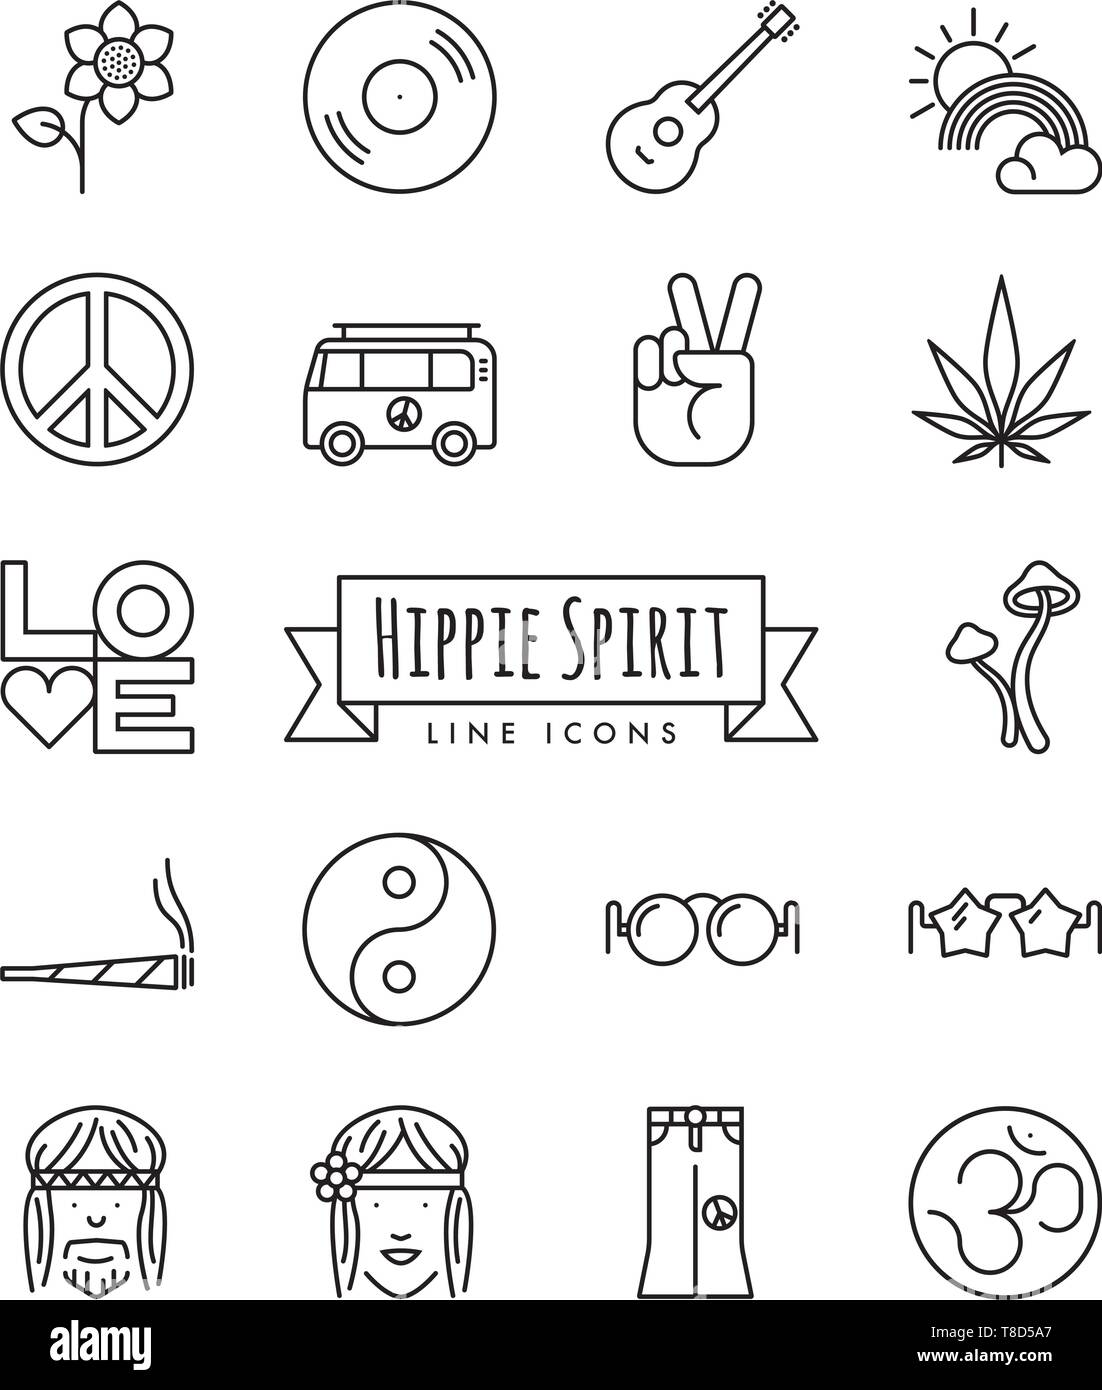 Hippie spirit line icons set. Collection of Hippie lifestyle and  accessories symbols vector illustration Stock Vector Image & Art - Alamy